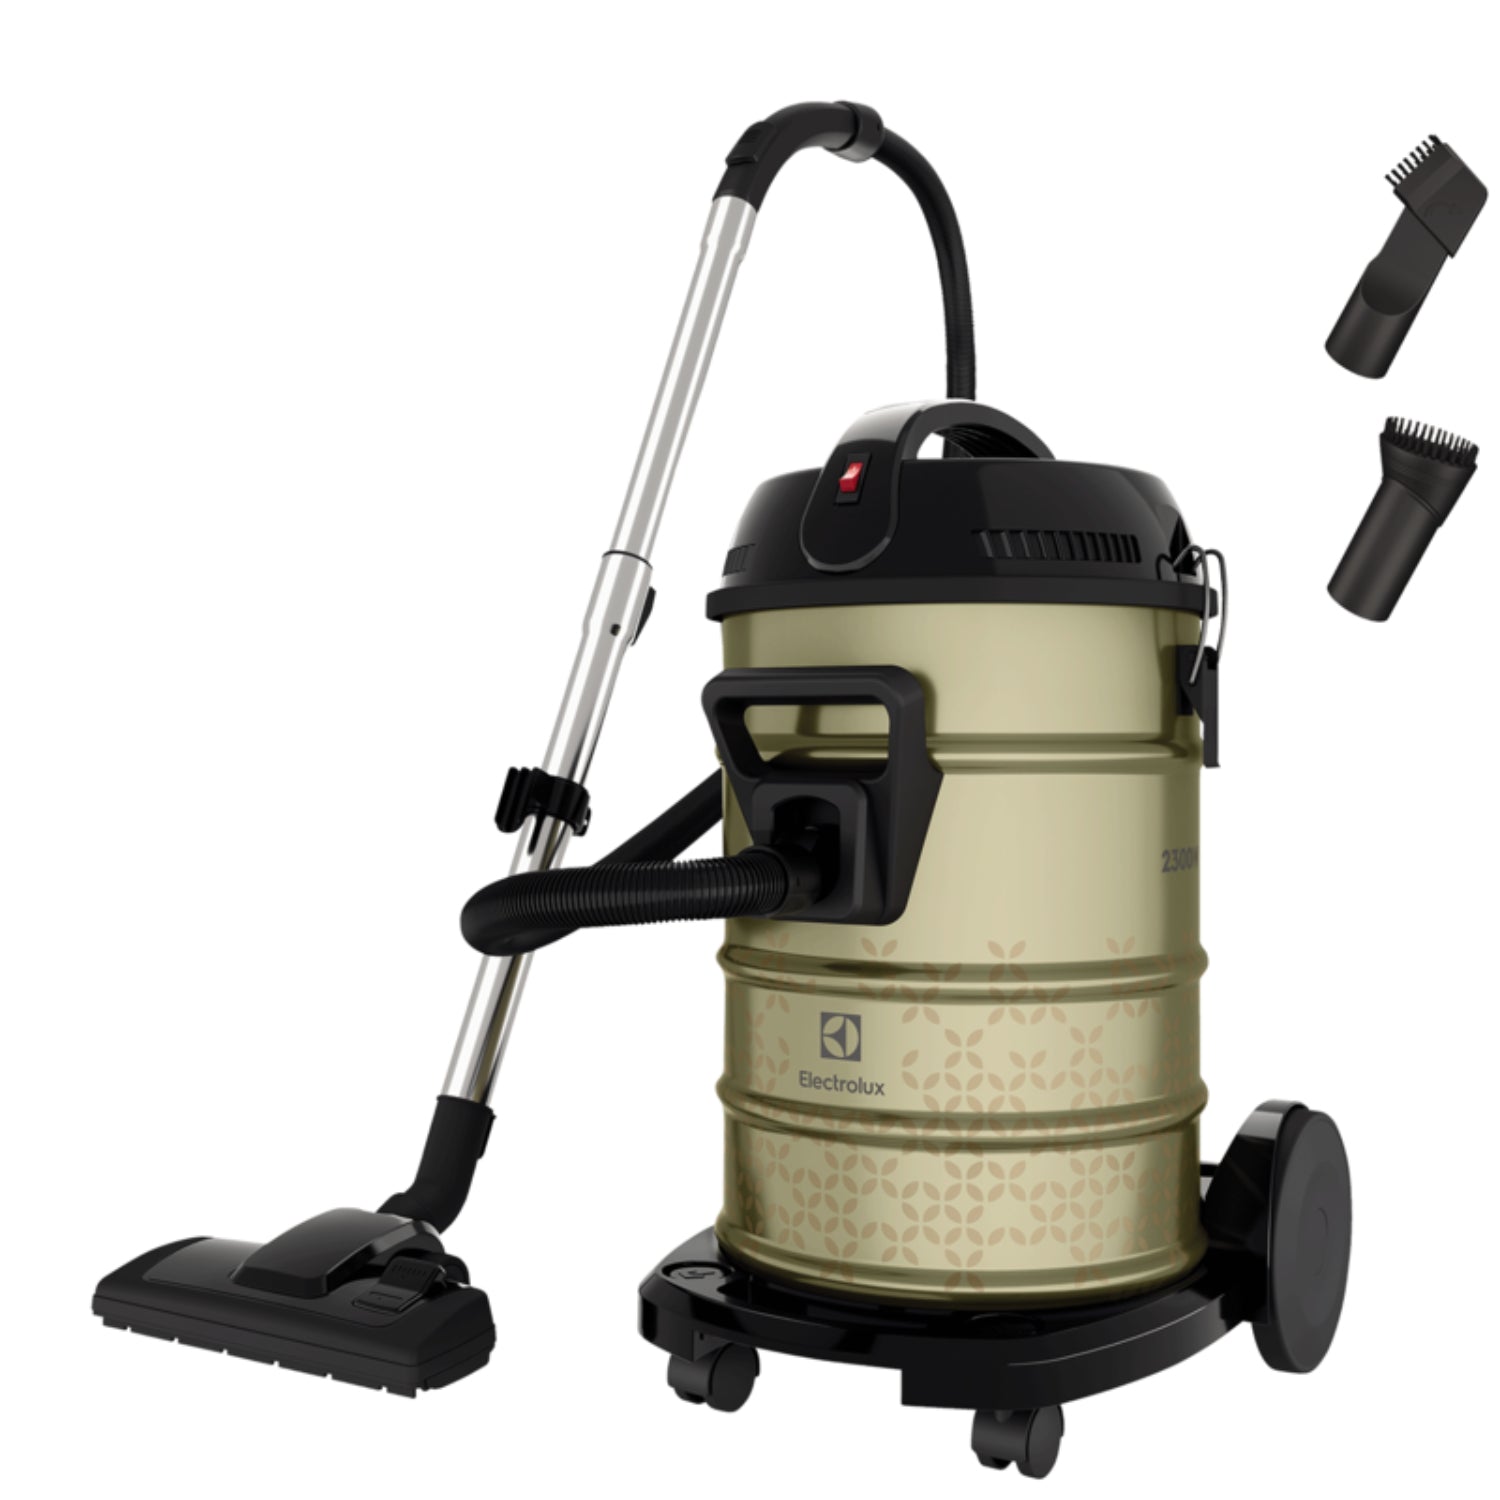 Electrolux Vacuum Cleaner, 2300W, Dry Drum with 23L Dust Bin Capacity, Soft Sand Metallic